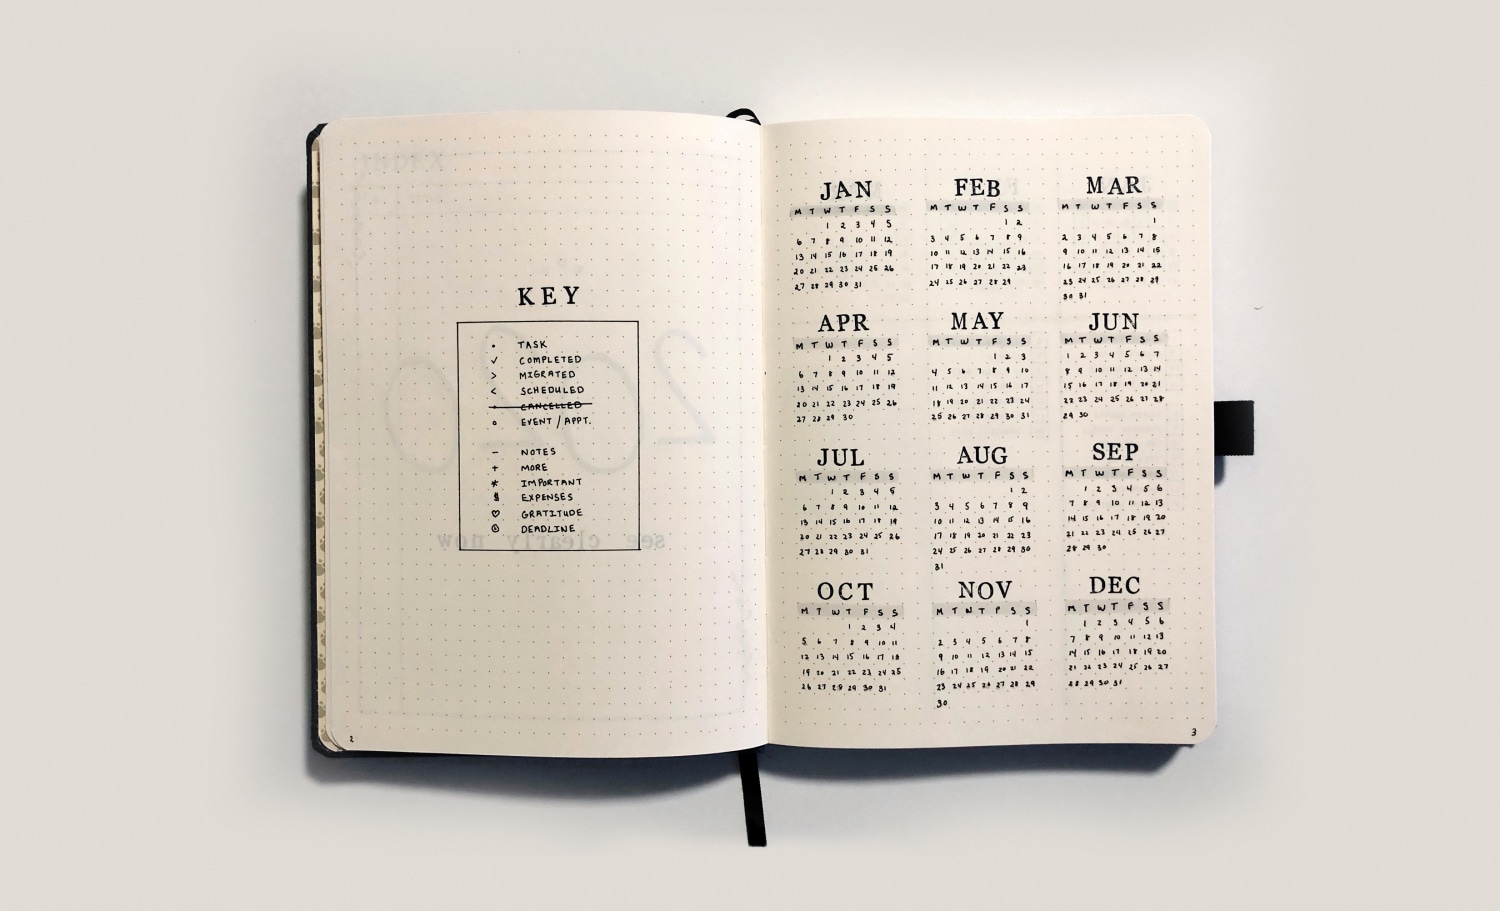 Bullet Journaling® Series Part 2: Getting Started with your Bullet